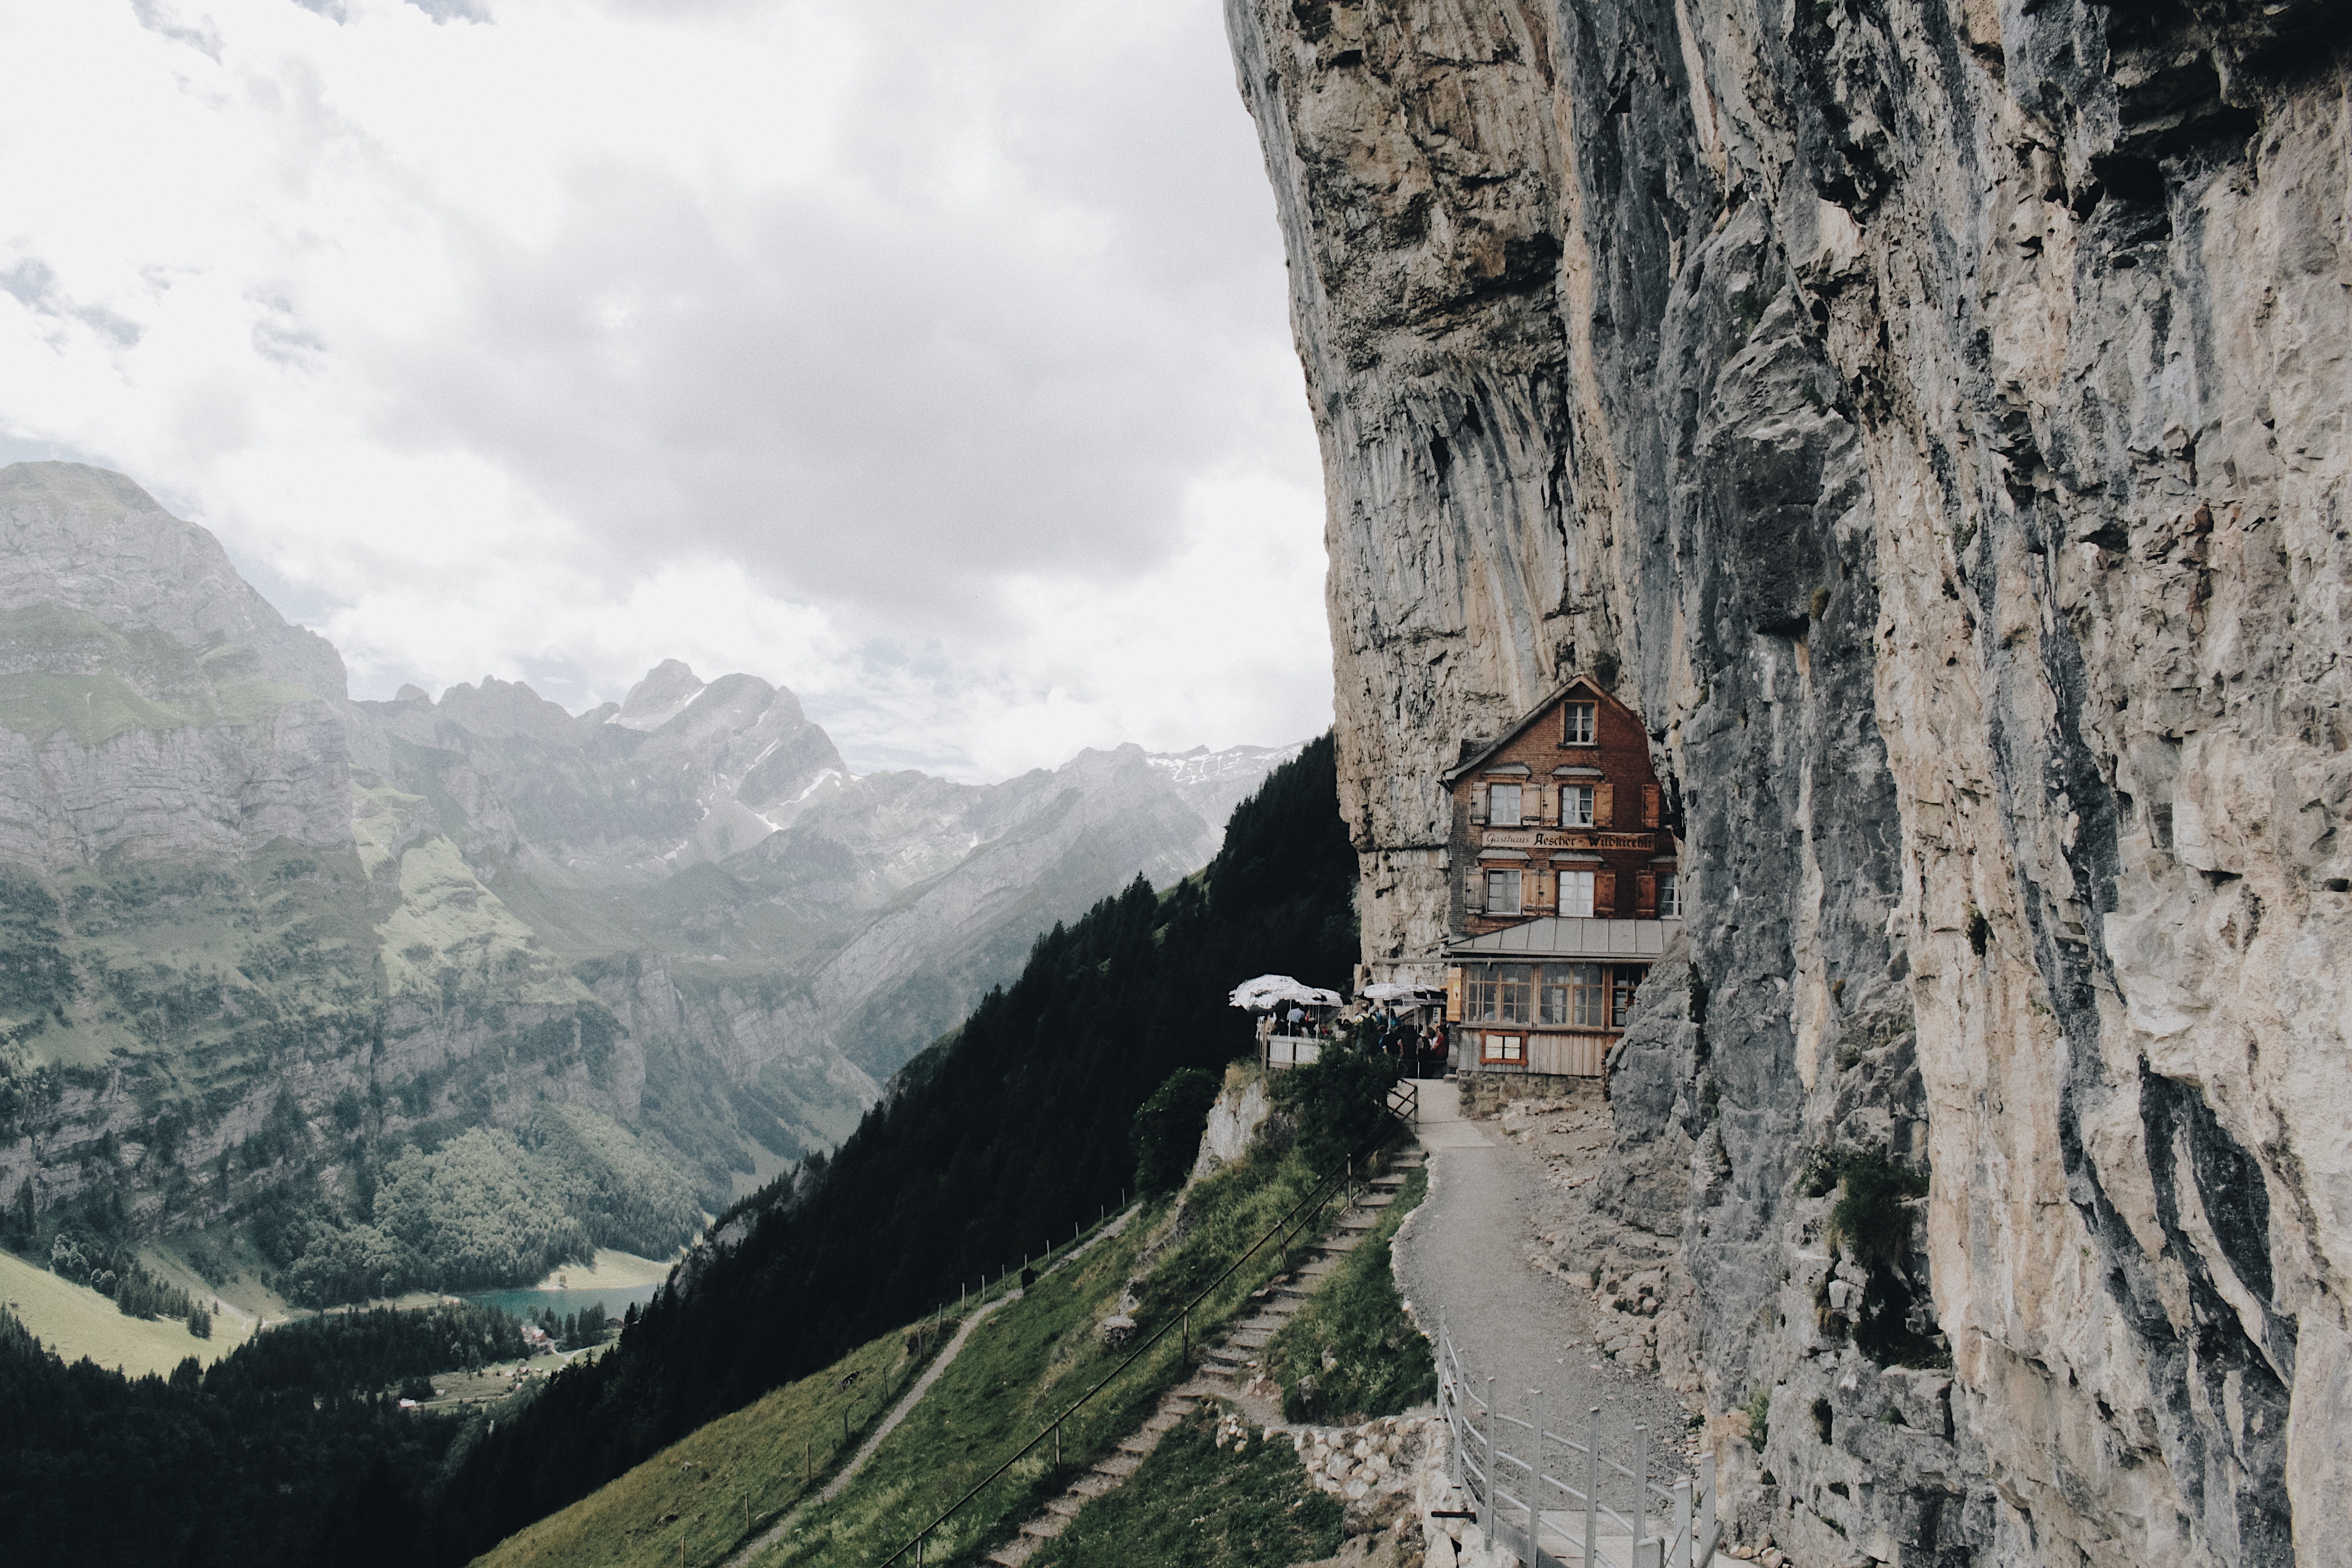 A restaurant on a mountainside during cloudy weather